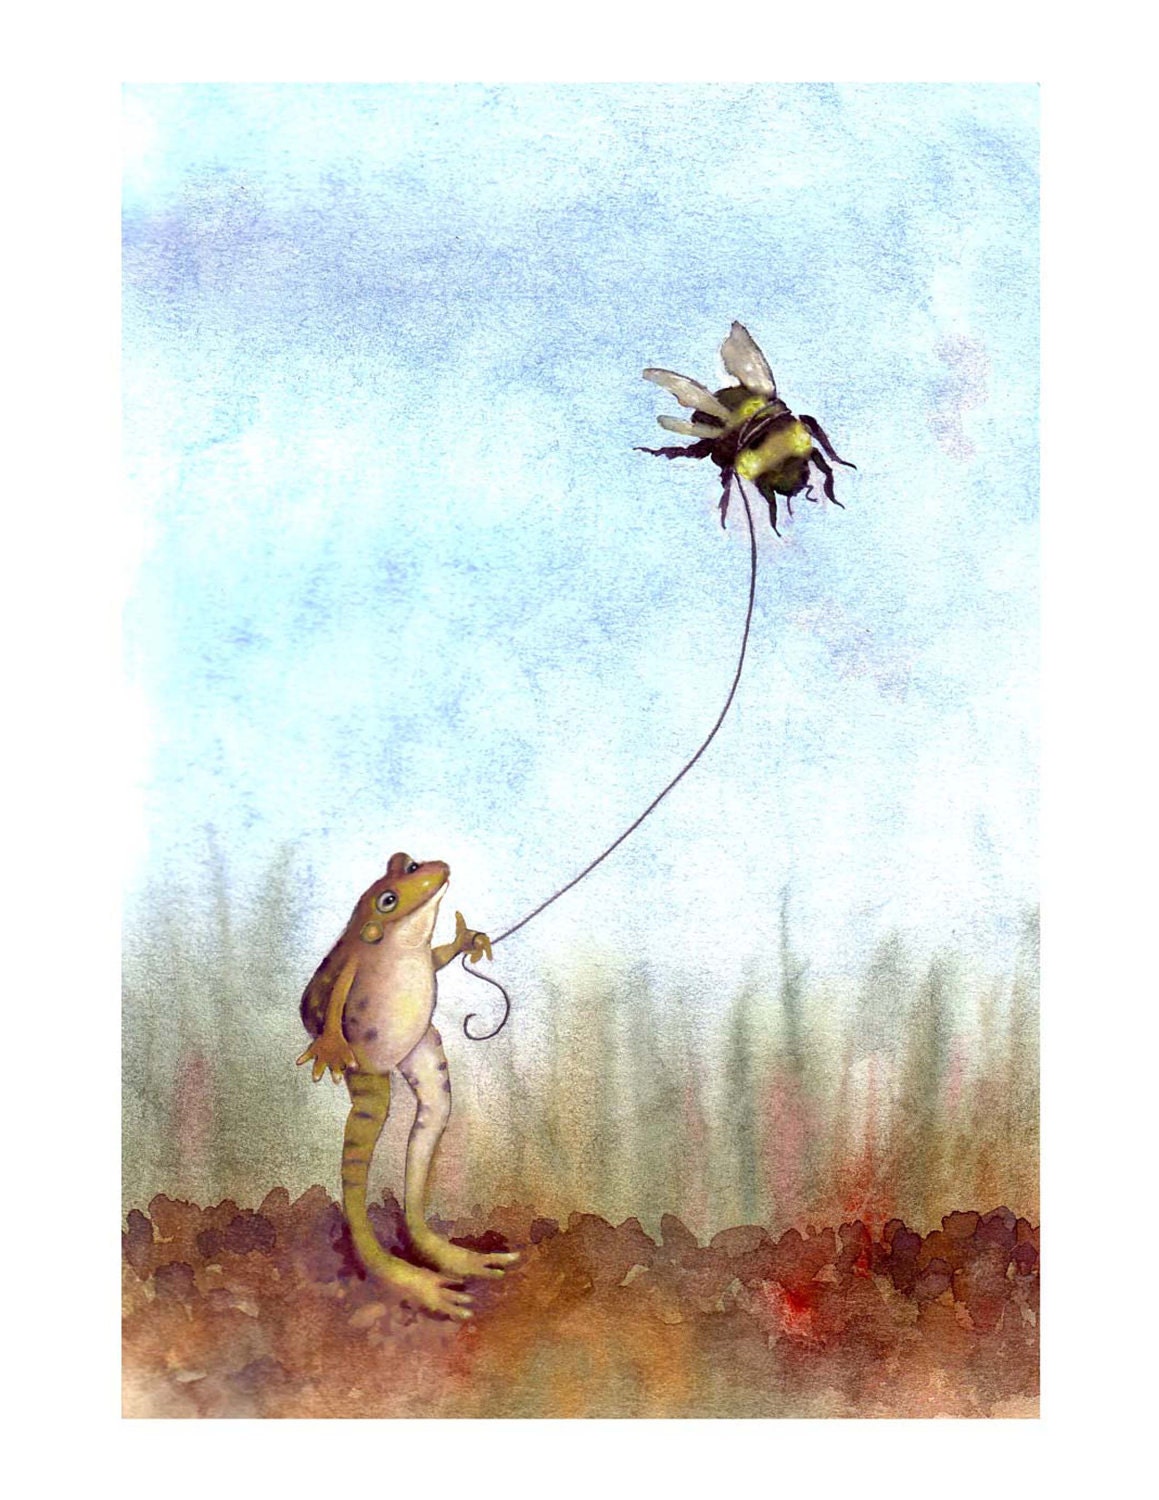 Frog & Bumblebee Print- Bee and Frog Art Watercolor Illustrationt- 'Go Fly A Bumblebee'